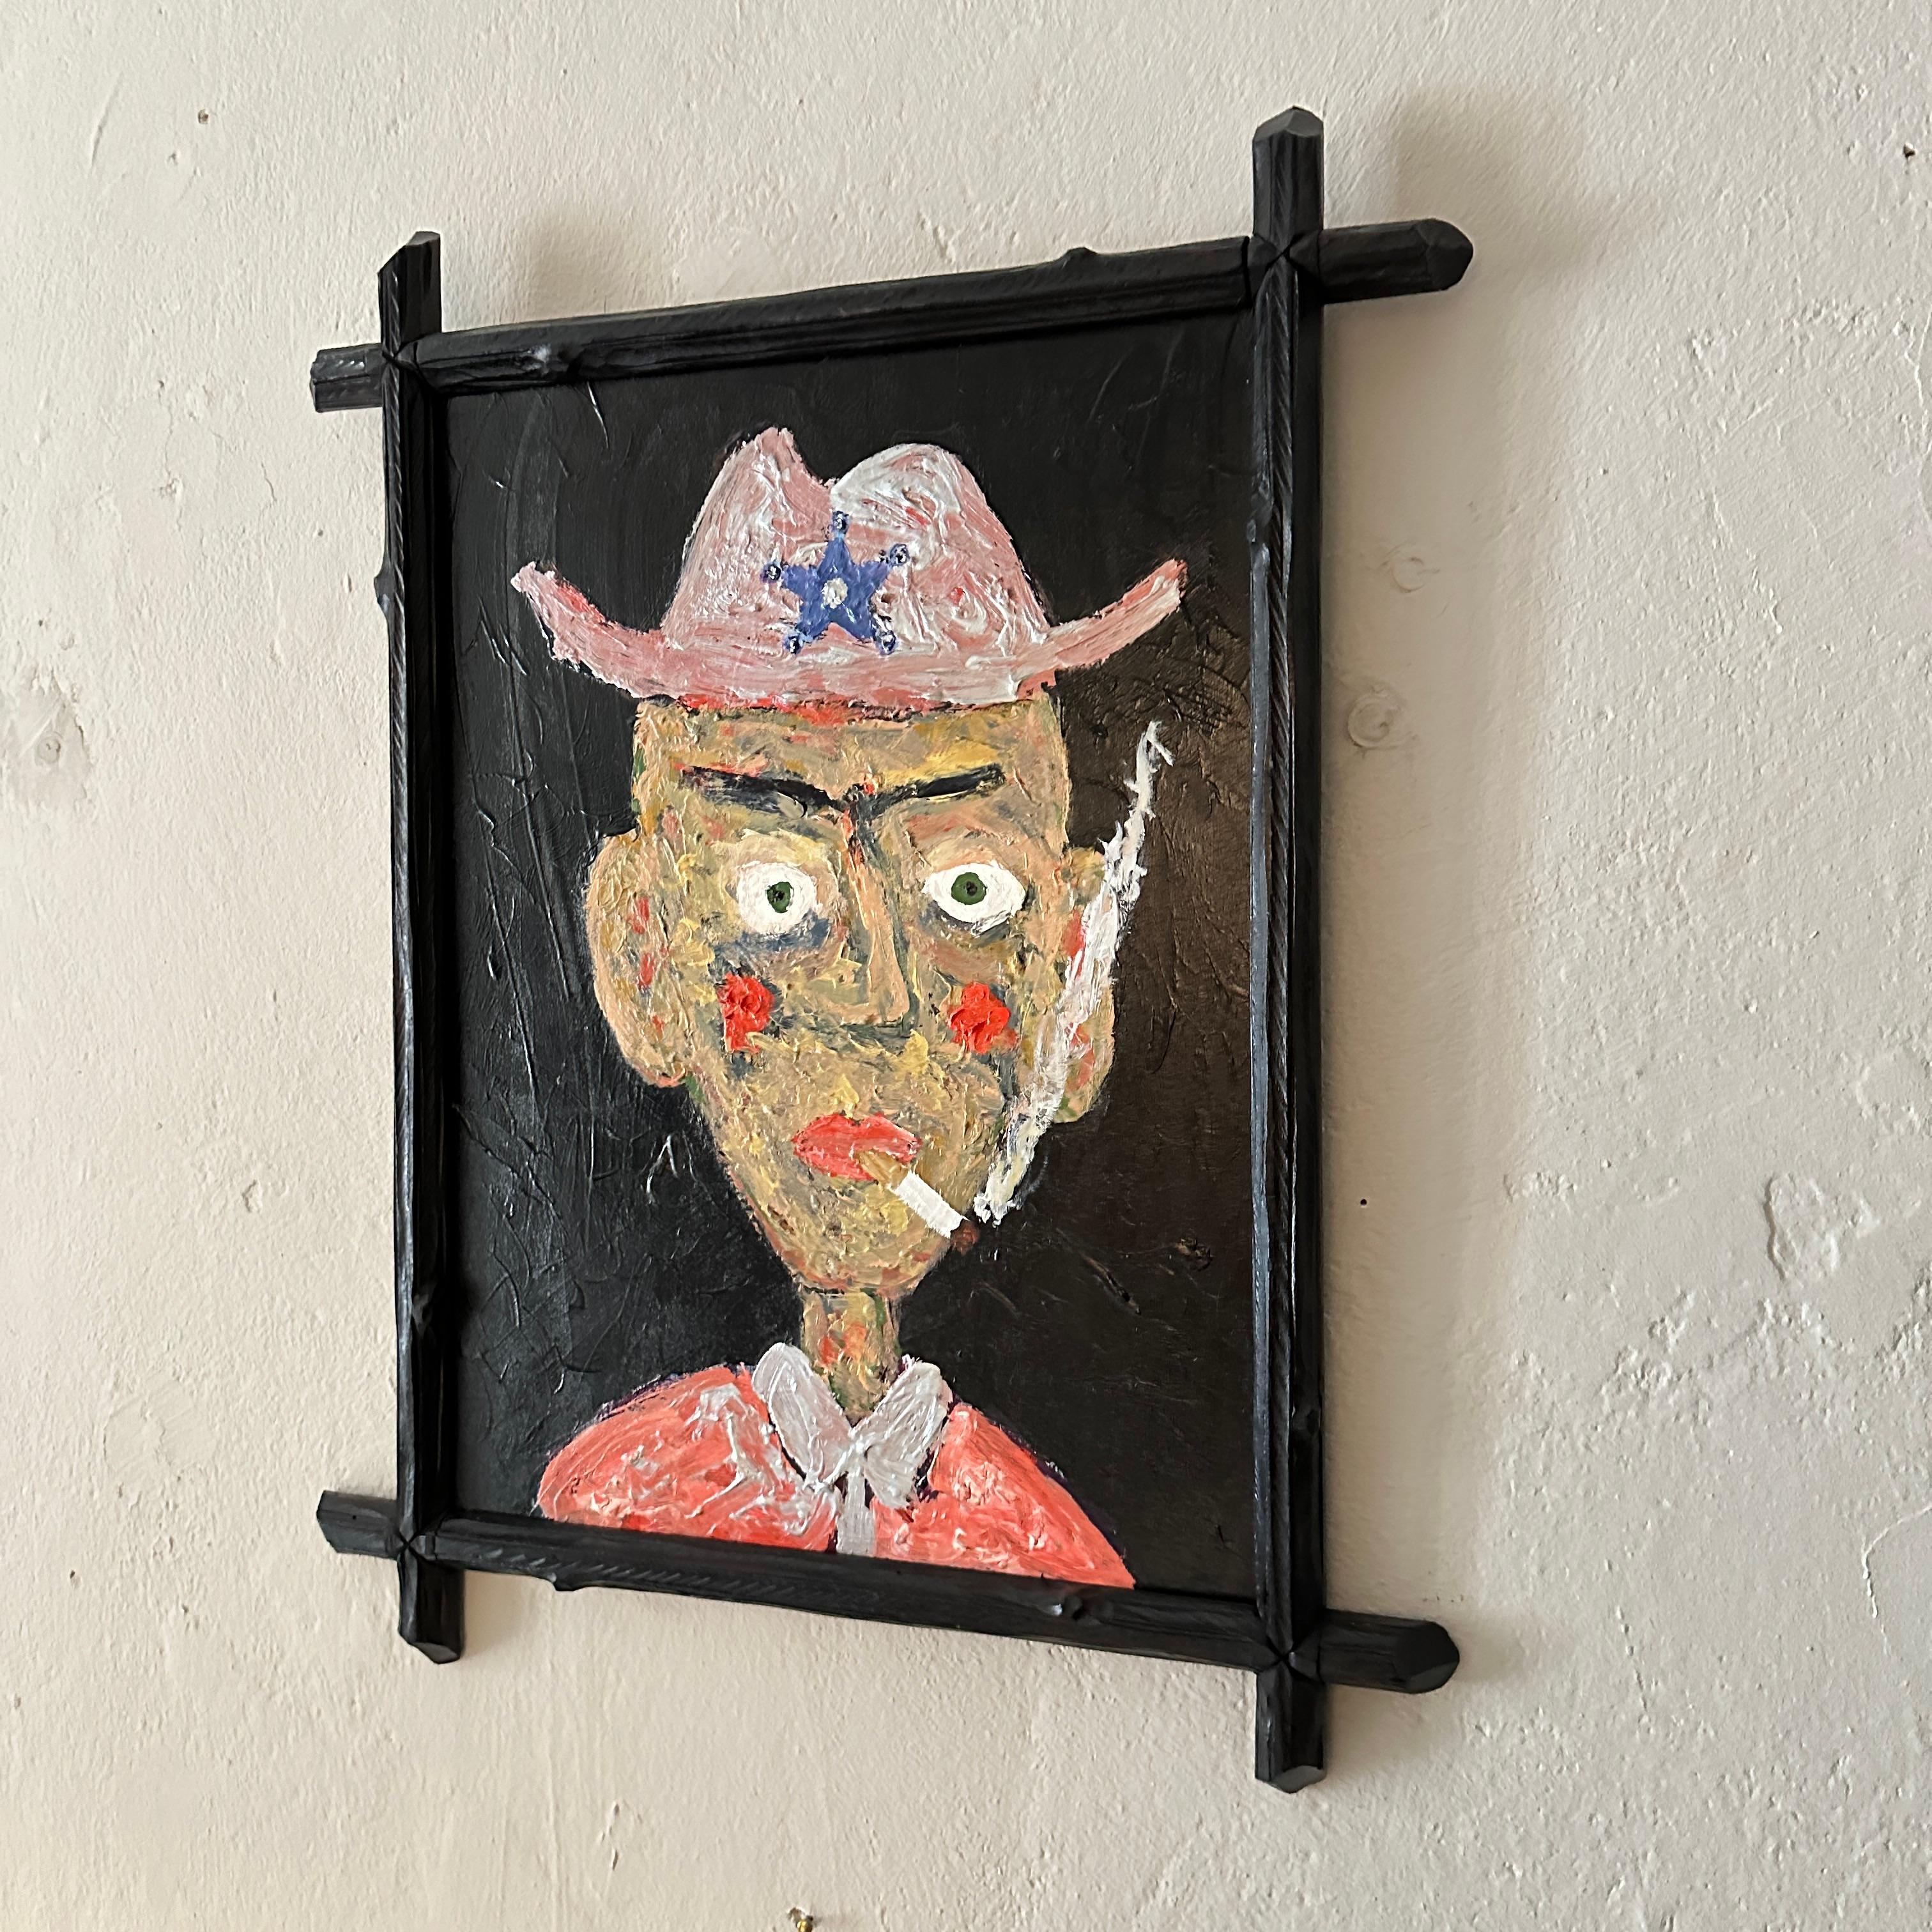 Beech Contemporary Portrait Painting of a Cowboy in Multicolored Acryl Paint on Wood